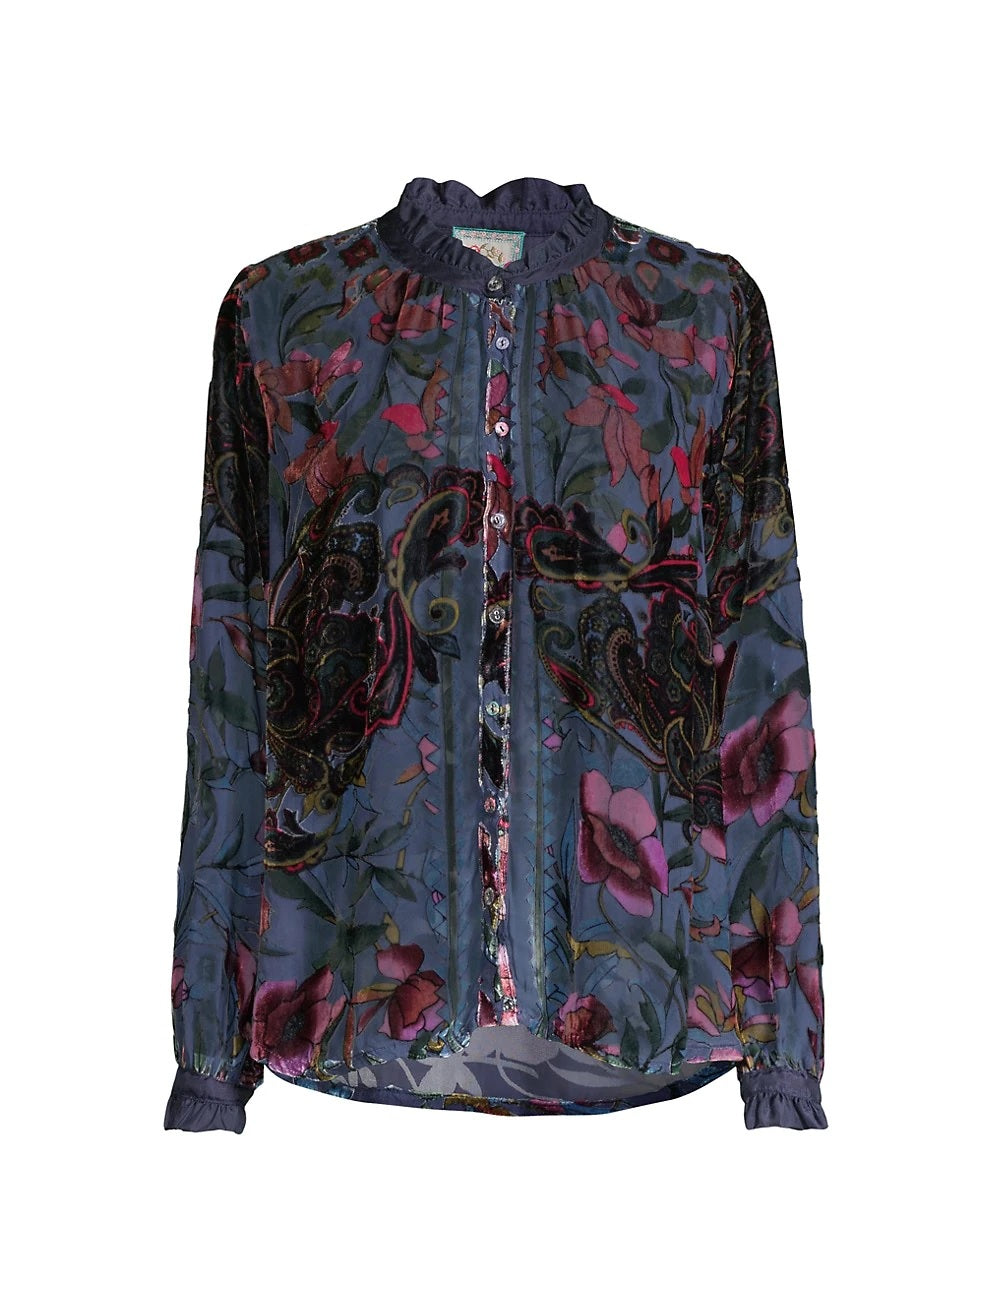 Johnny Was CLARA BURNOUT LEDA BUTTON DOWN Top Shirt Embroidered Floral ...